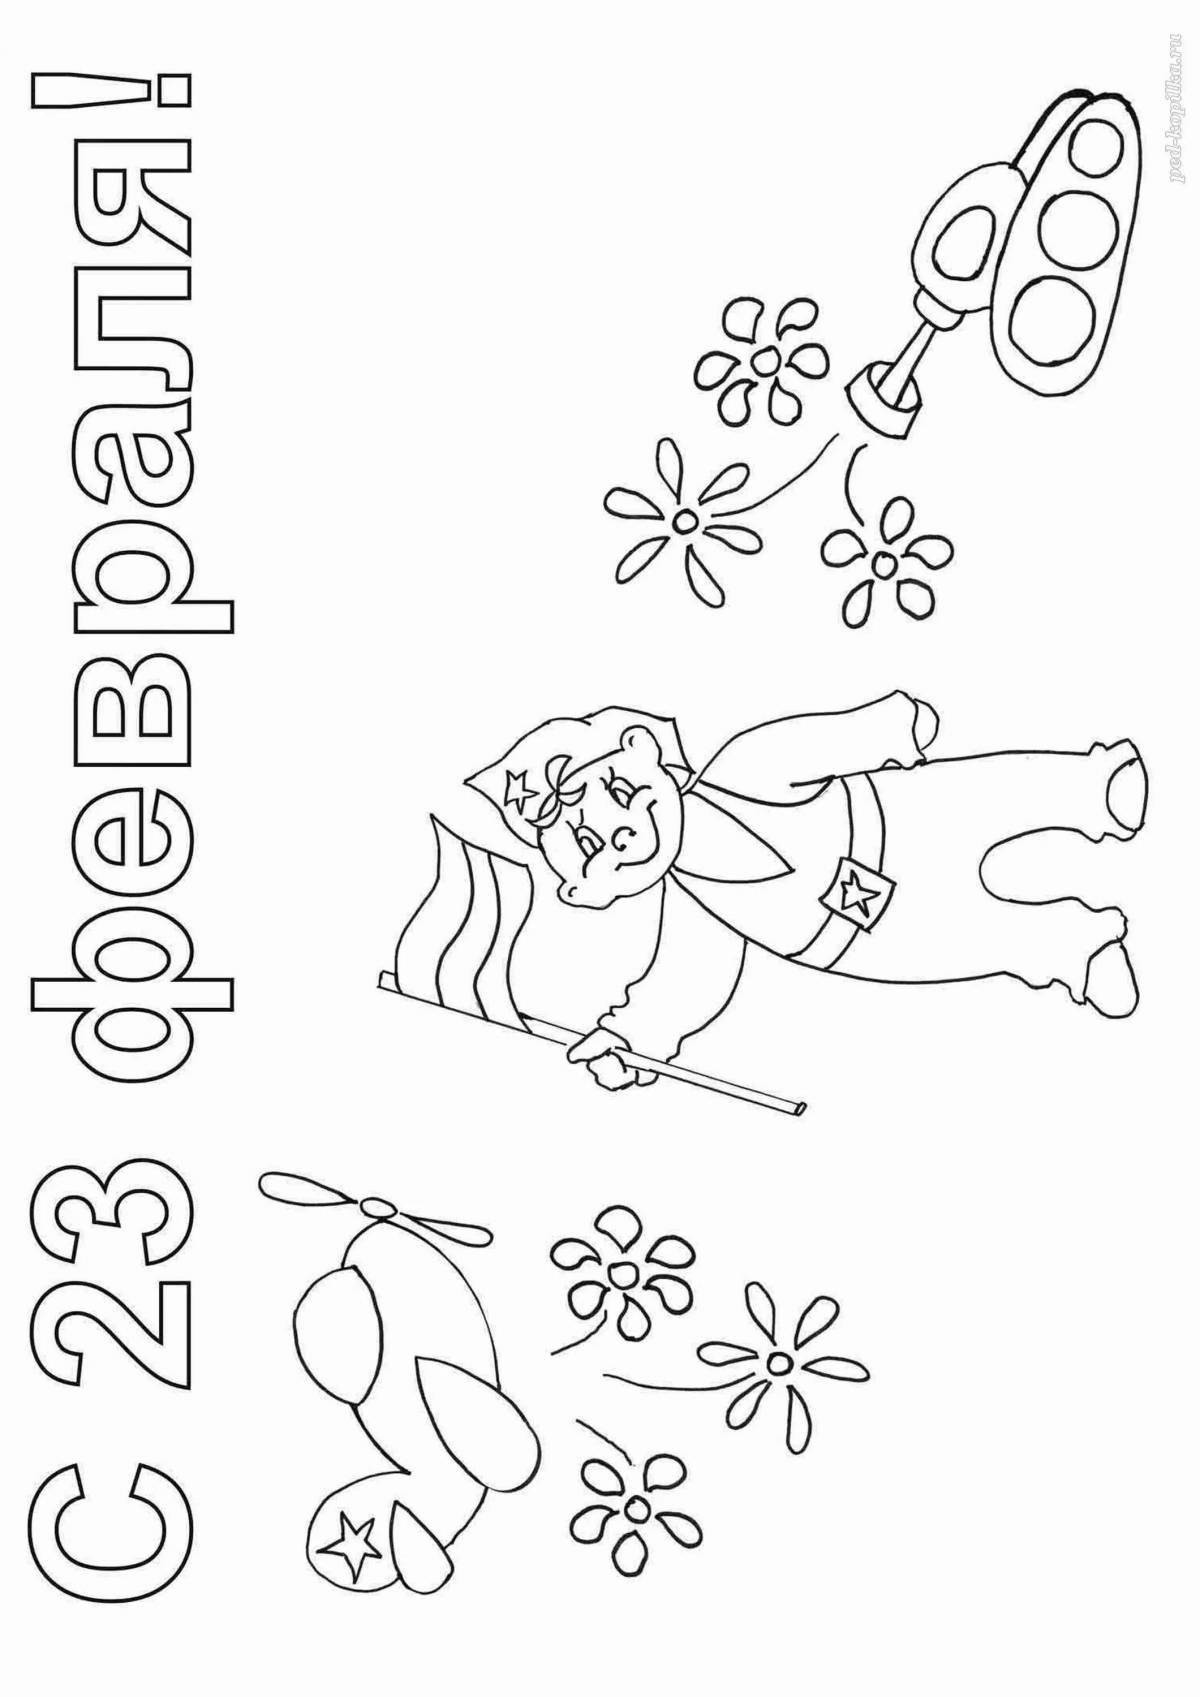 A fascinating coloring picture for February 23